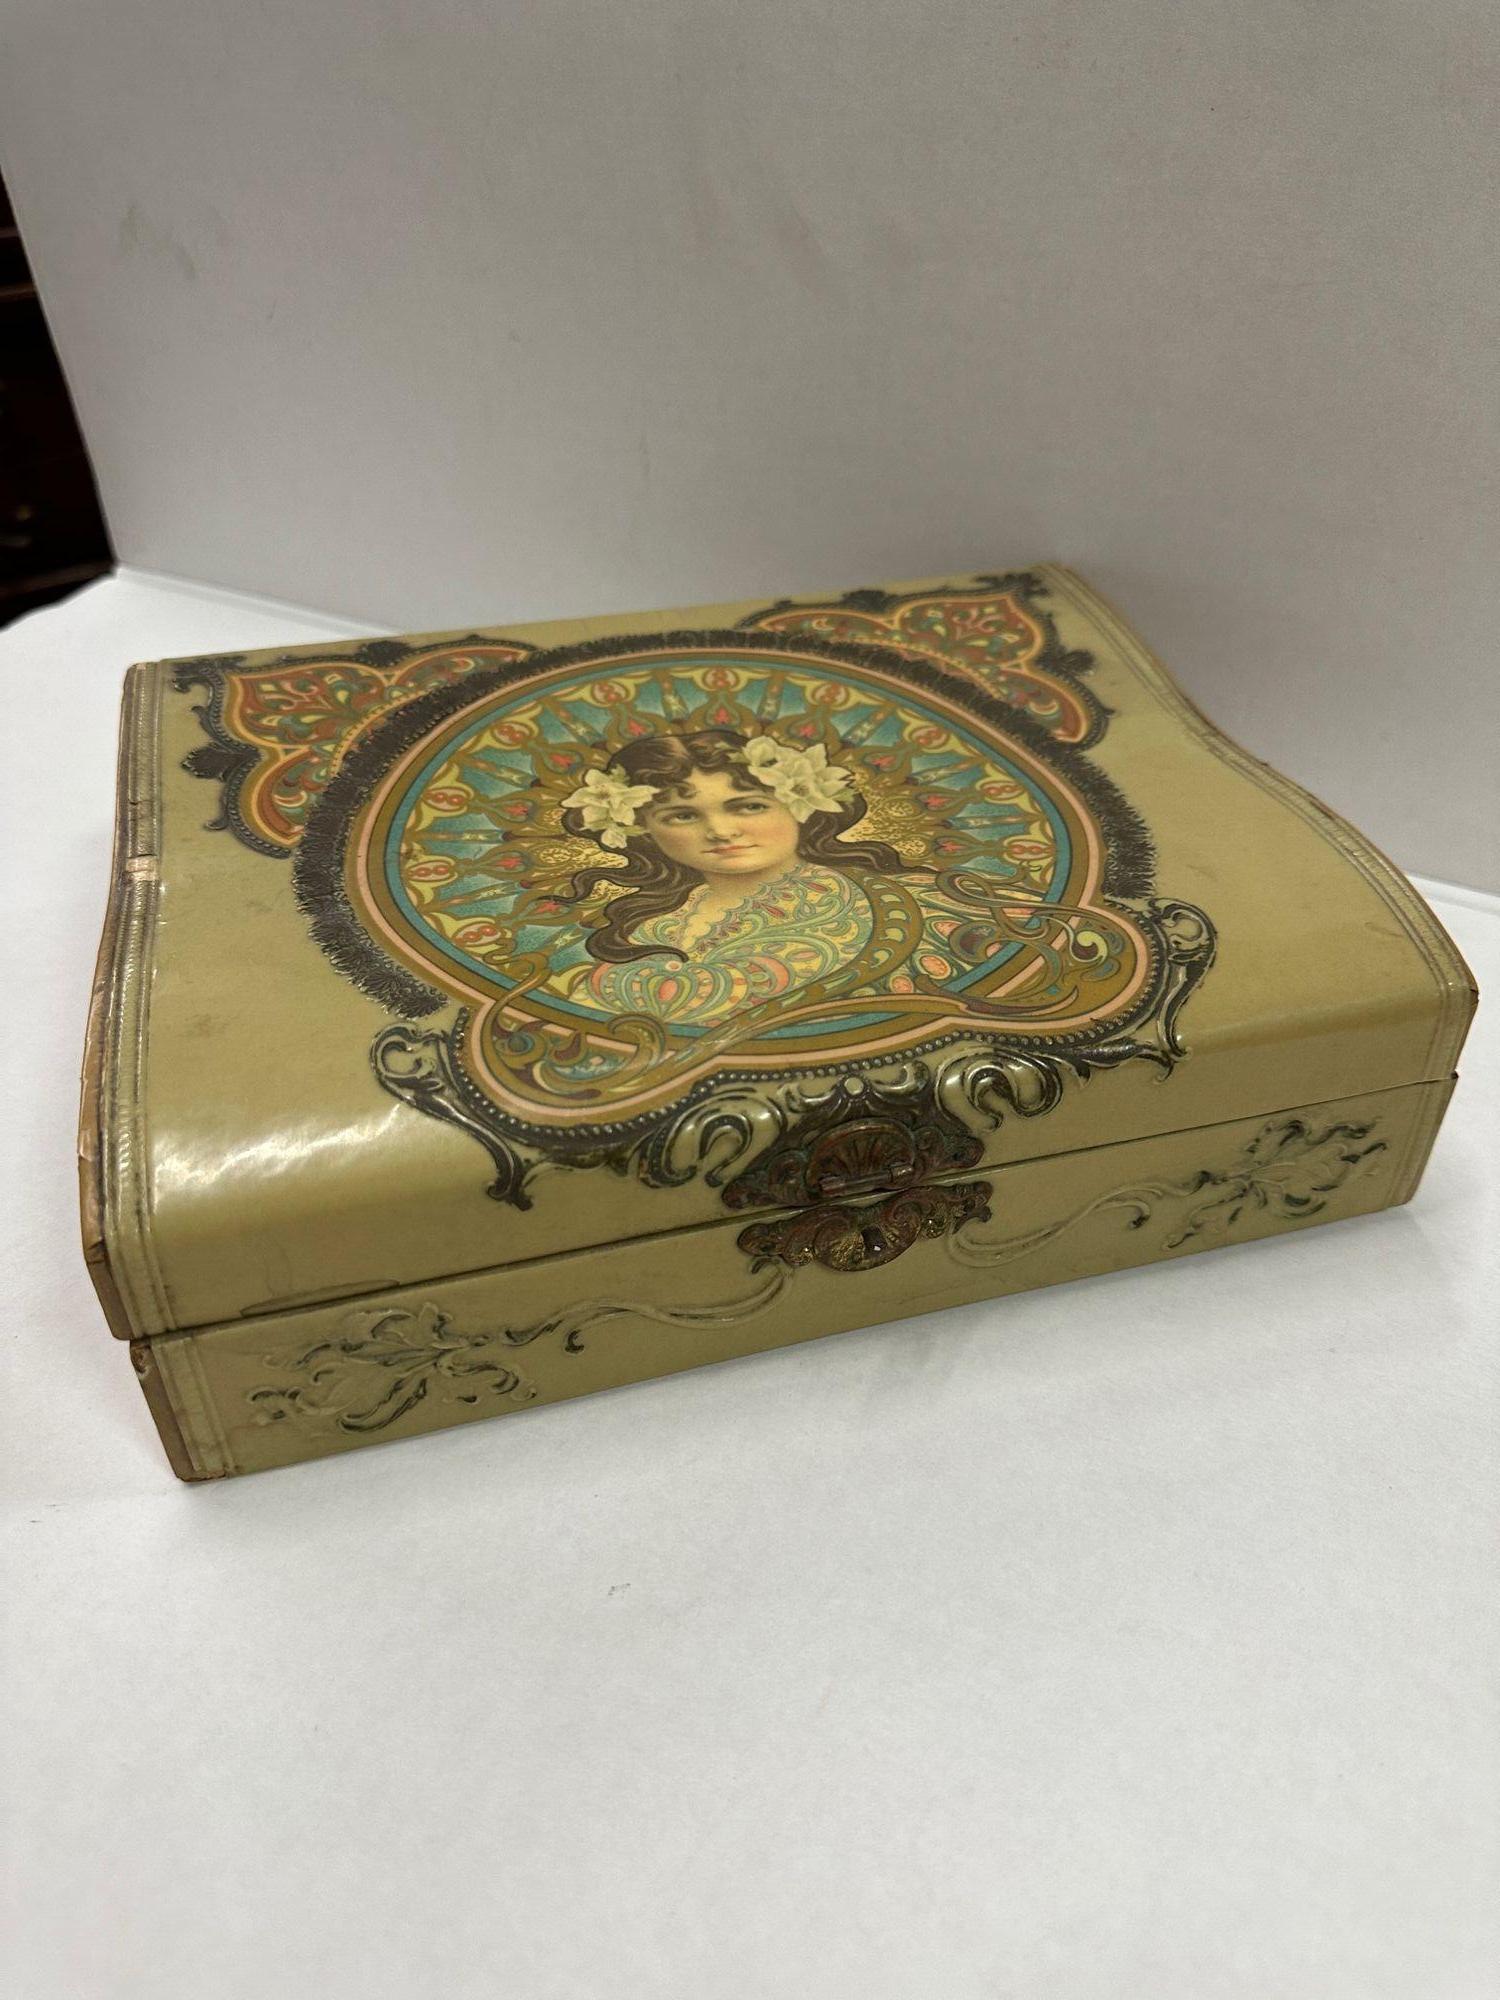 Art Nouveau Jewelry Pink Satin Lined Box, the woman is depicted with flowers in her hair and pink cheeks.
Box has Evidence of wear over time, the back enamel lining is flaking off.

Art Nouveau was an influential artistic movement that flourished in